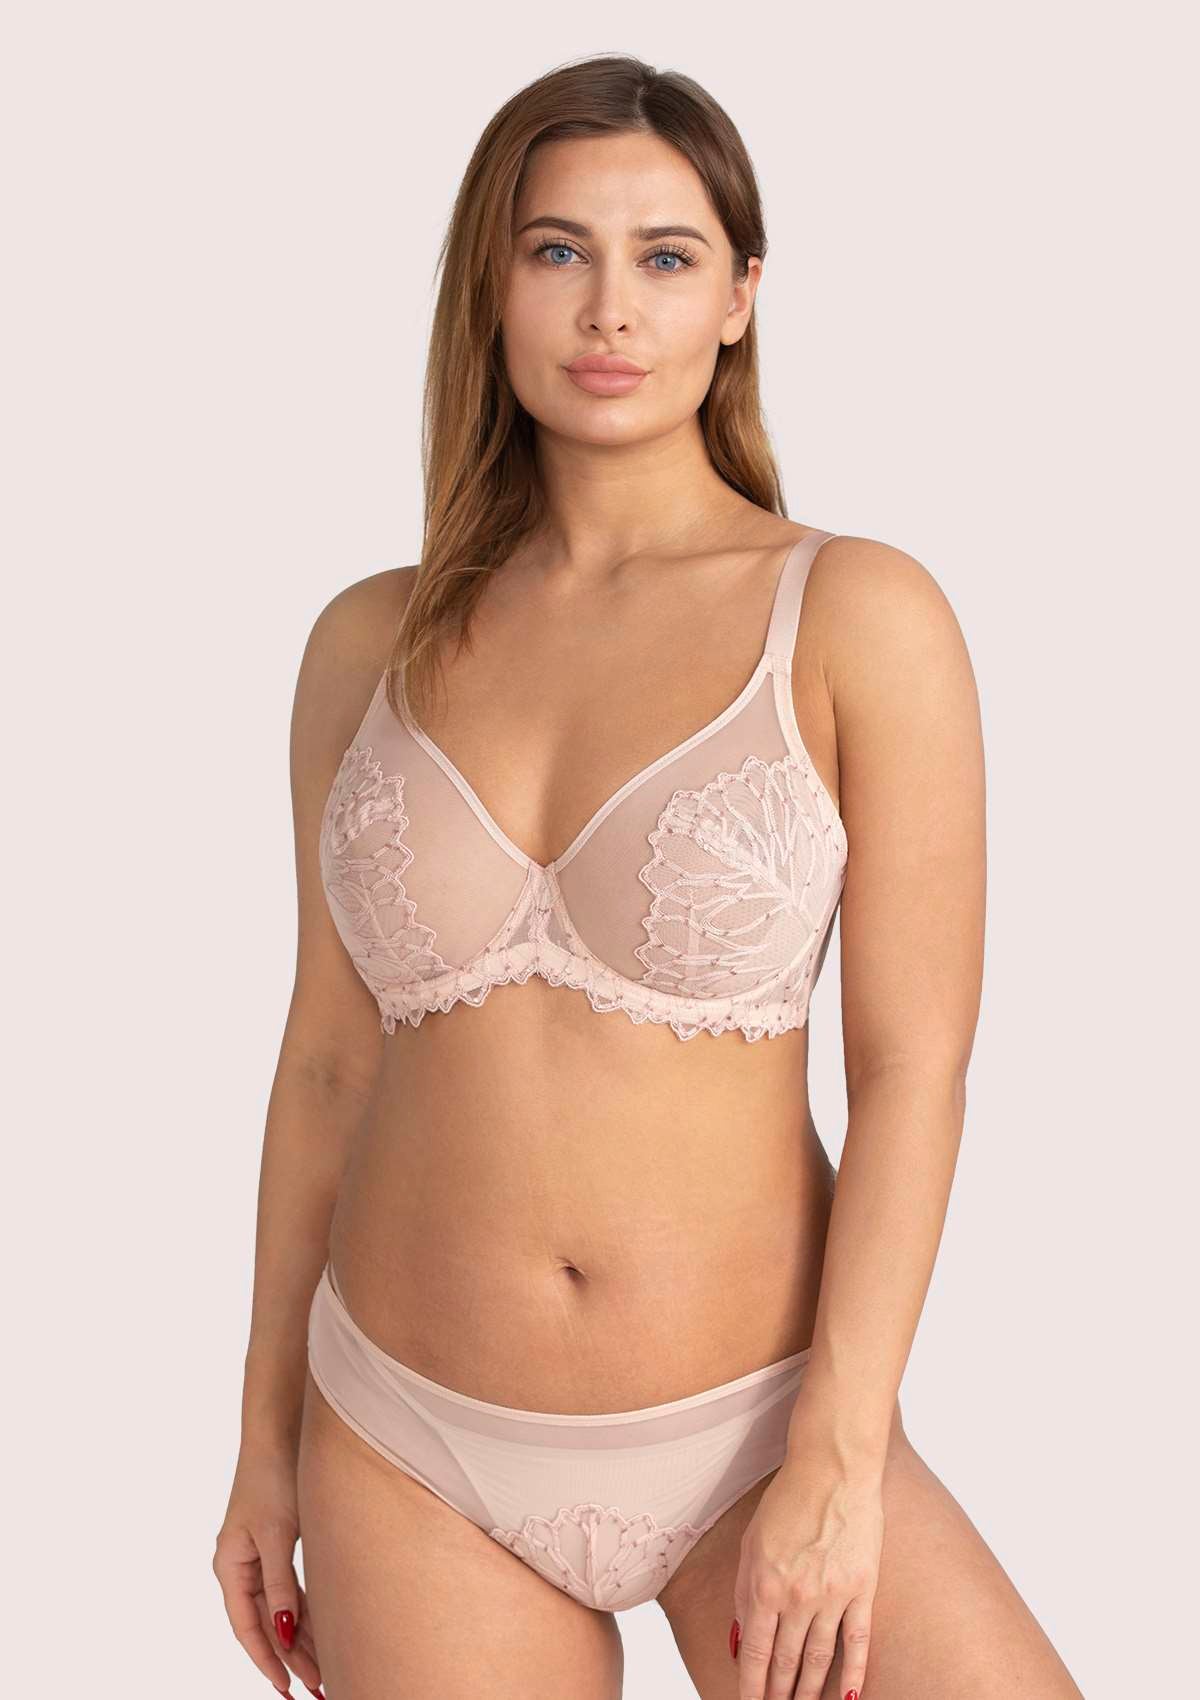 HSIA Chrysanthemum Plus Size Lace Bra: Back Support Bra For Posture - Light Pink / 32 / C